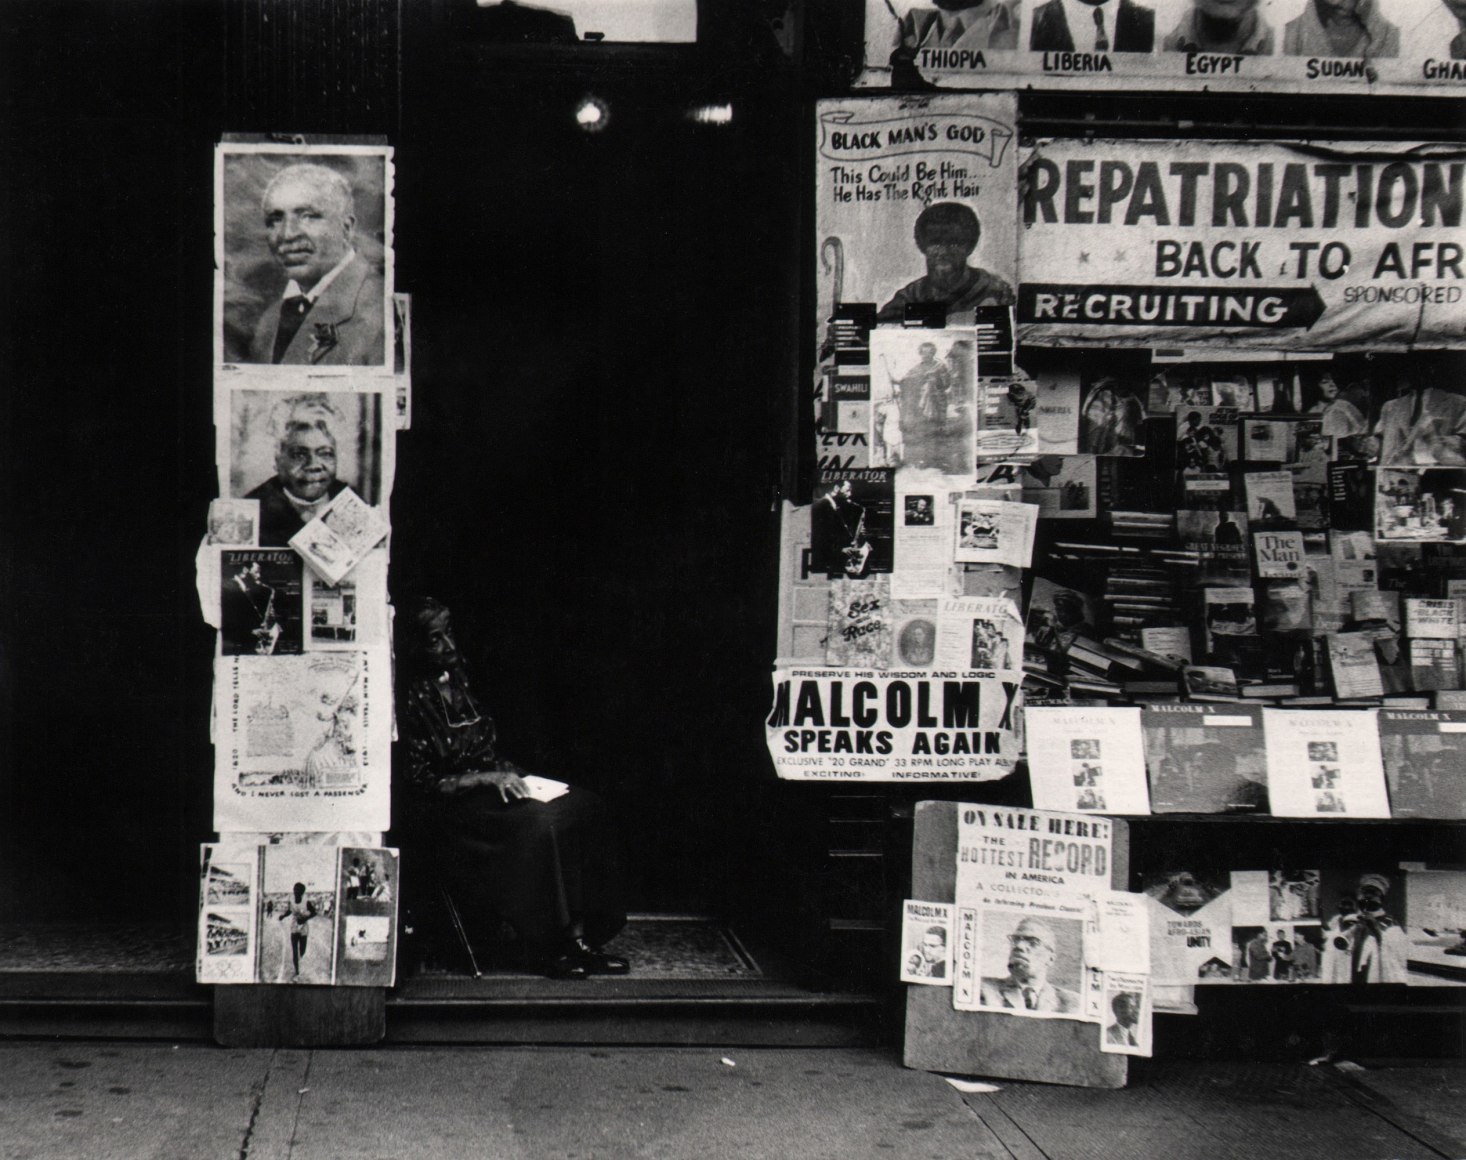 12. Beuford Smith, Woman in Doorway, Harlem, ​1965. An older woman seated in a dark doorway, surrounded by signs such as &quot;repatriation,&quot; &quot;Malcolm X,&quot; &quot;Black Man's God,&quot; etc.